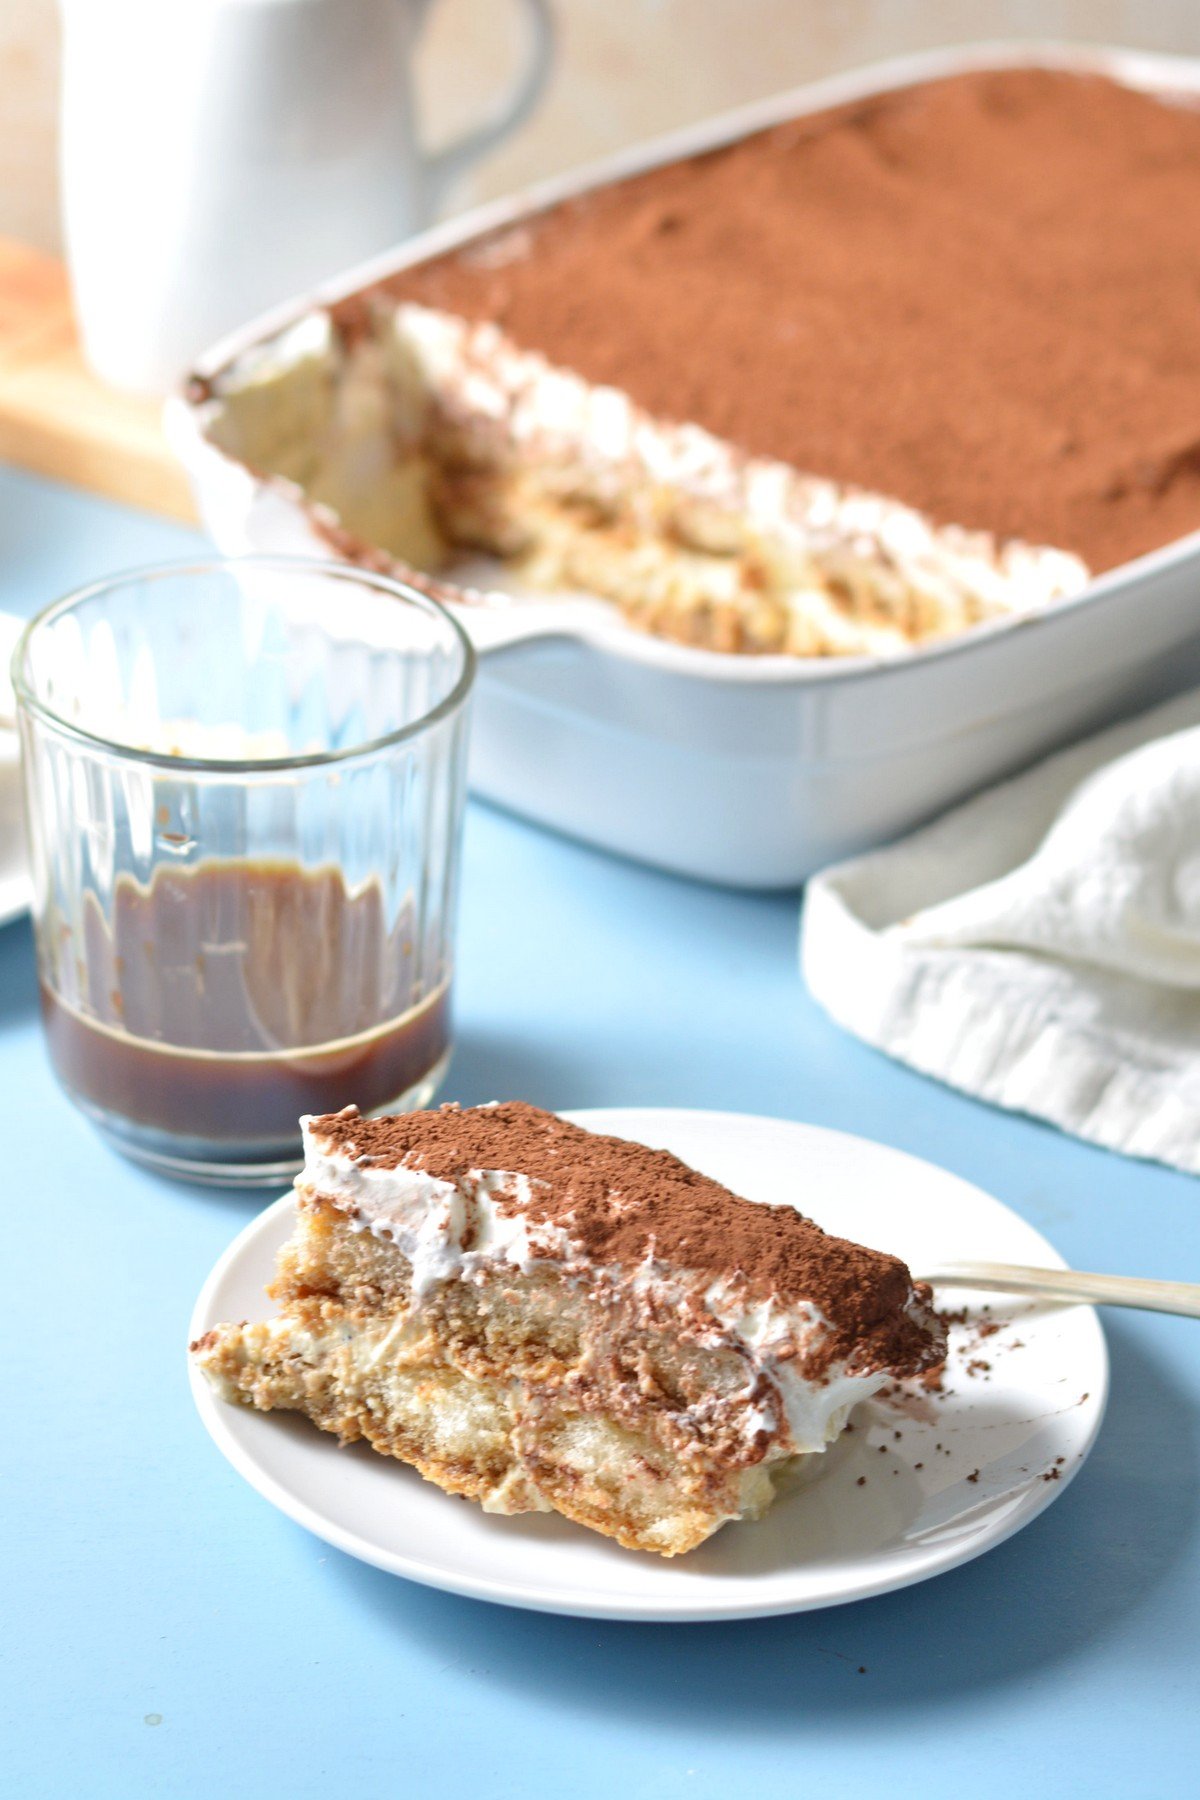 Protein tiramisu on a plate in front of a cup of coffee and a tray of the dessert.